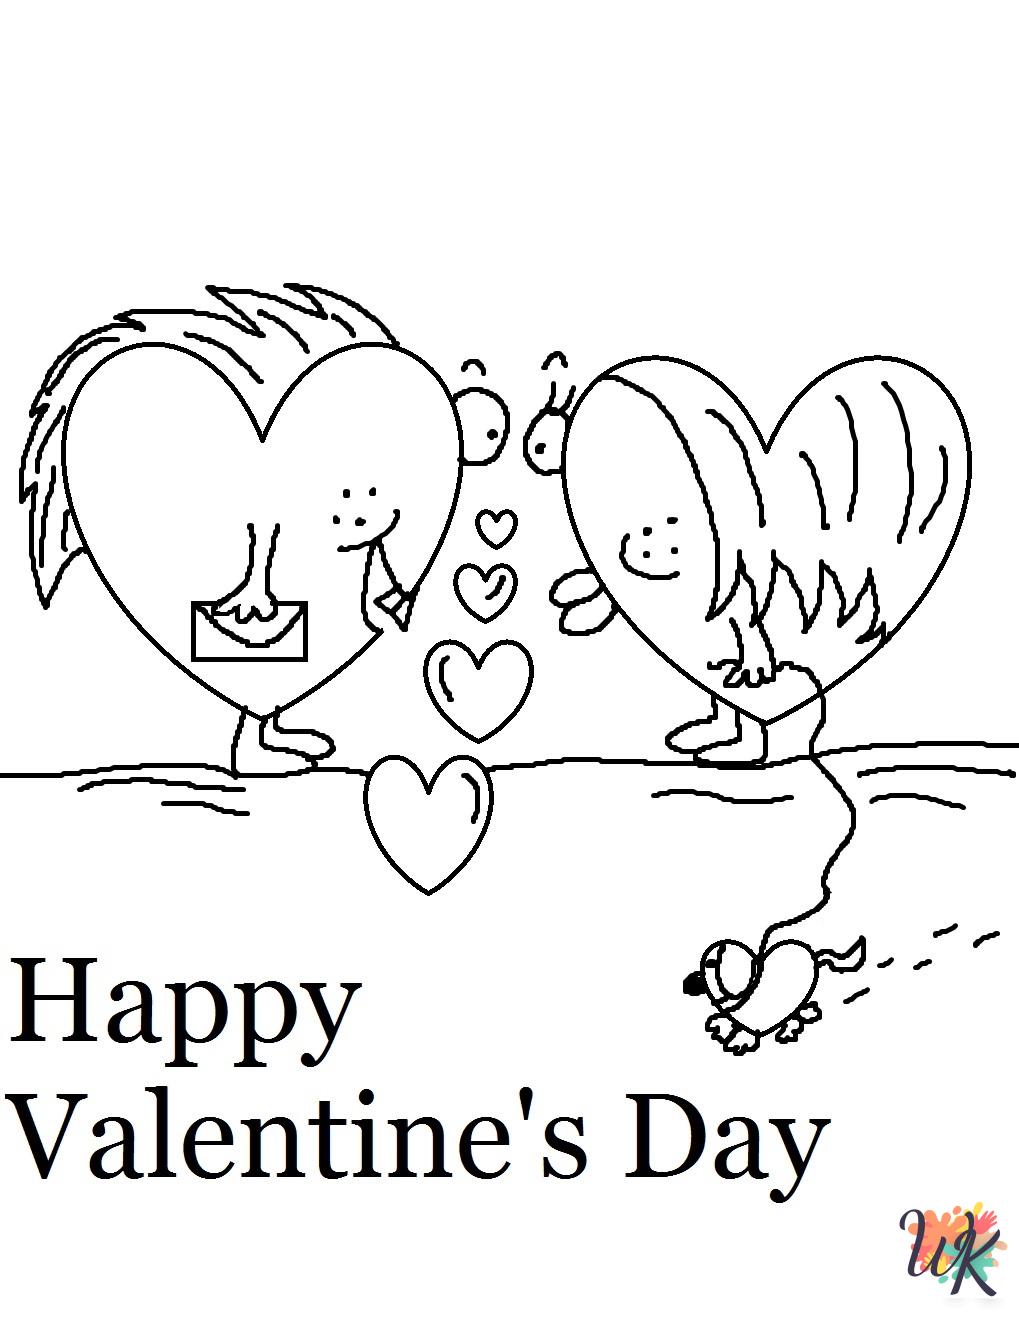 Valentine's Day coloring pages printable